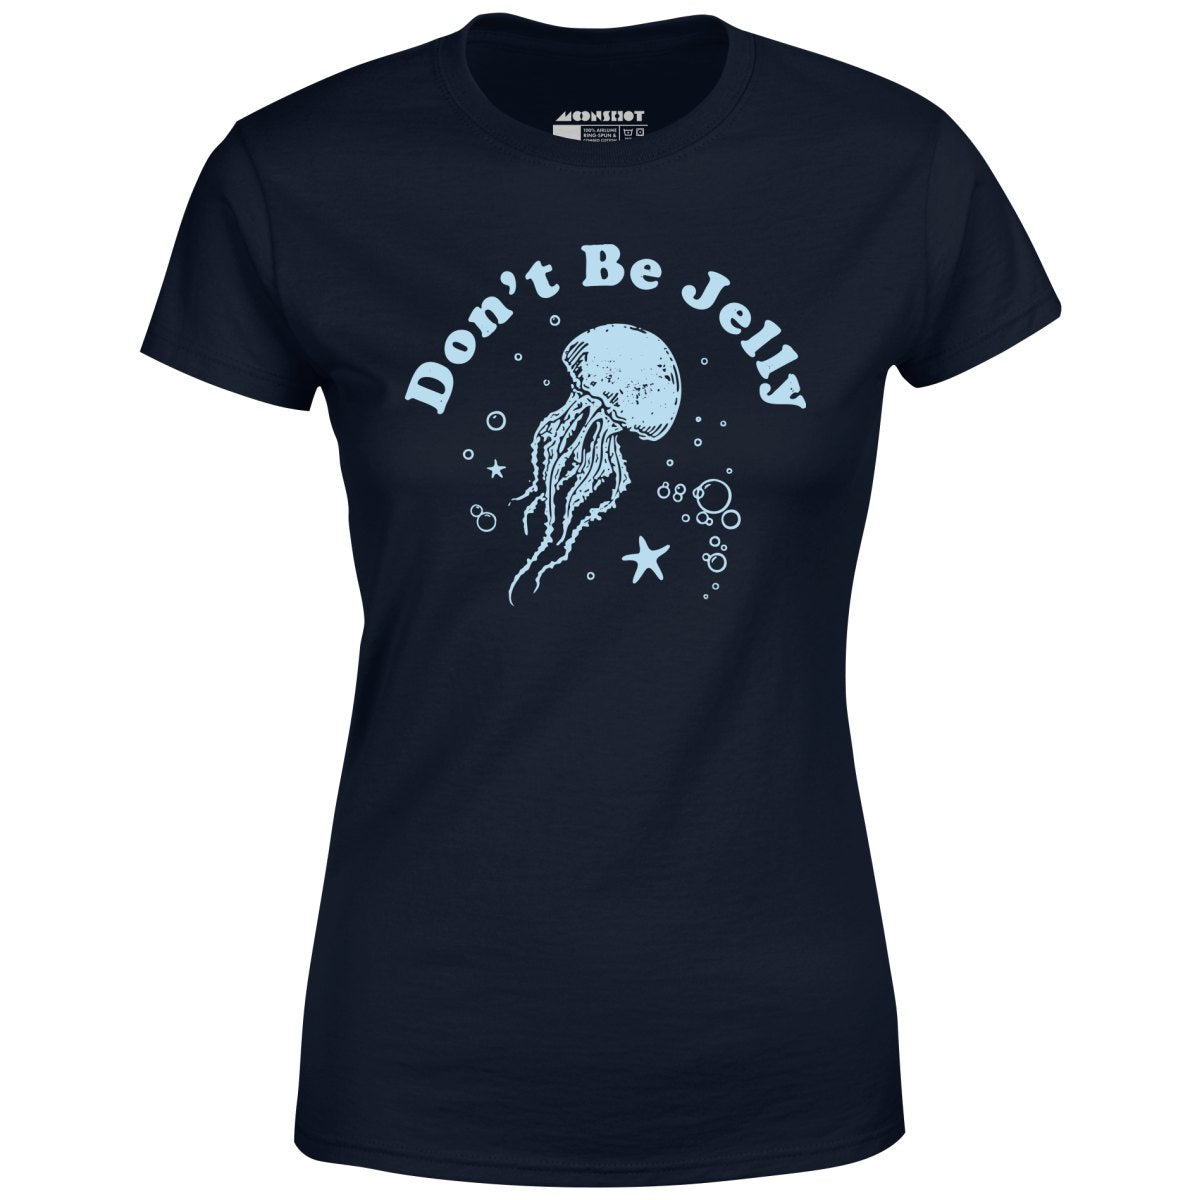 Don't Be Jelly - Women's T-Shirt